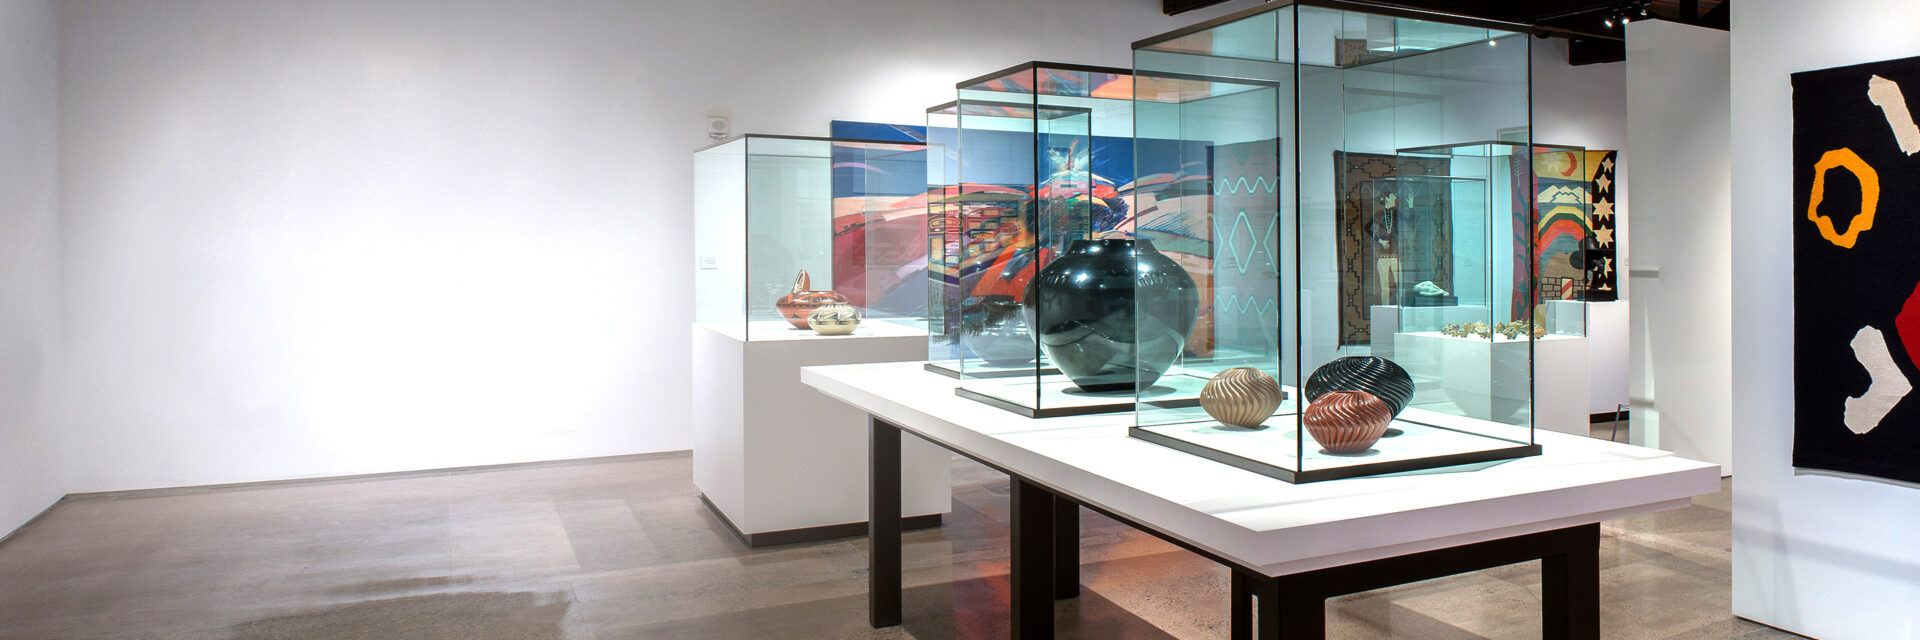 A gallery of glass display cases with jars on them and paintings on the walls.